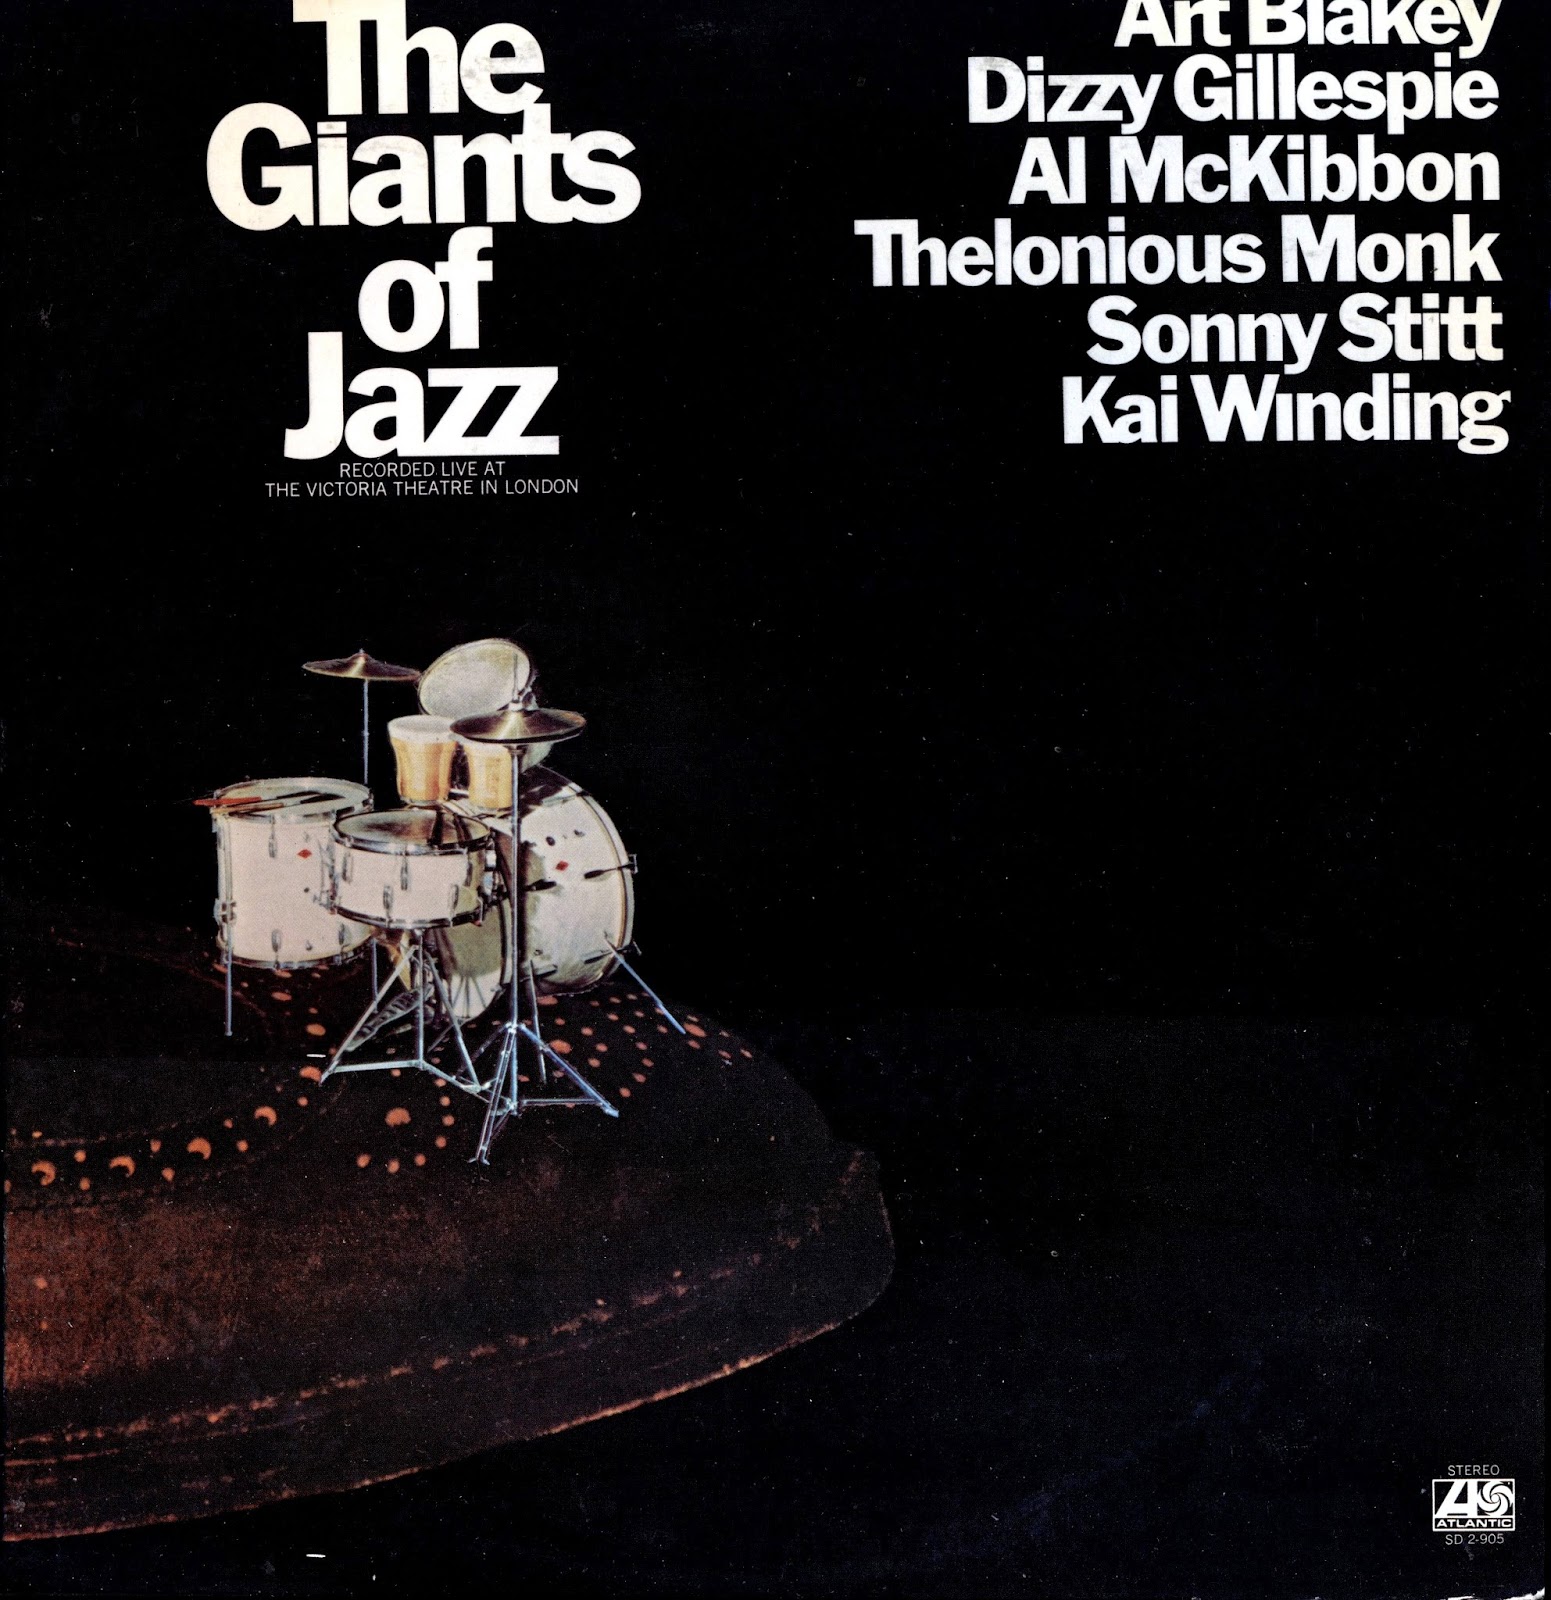 ART BLAKEY - The Giants of Jazz – Live in London cover 